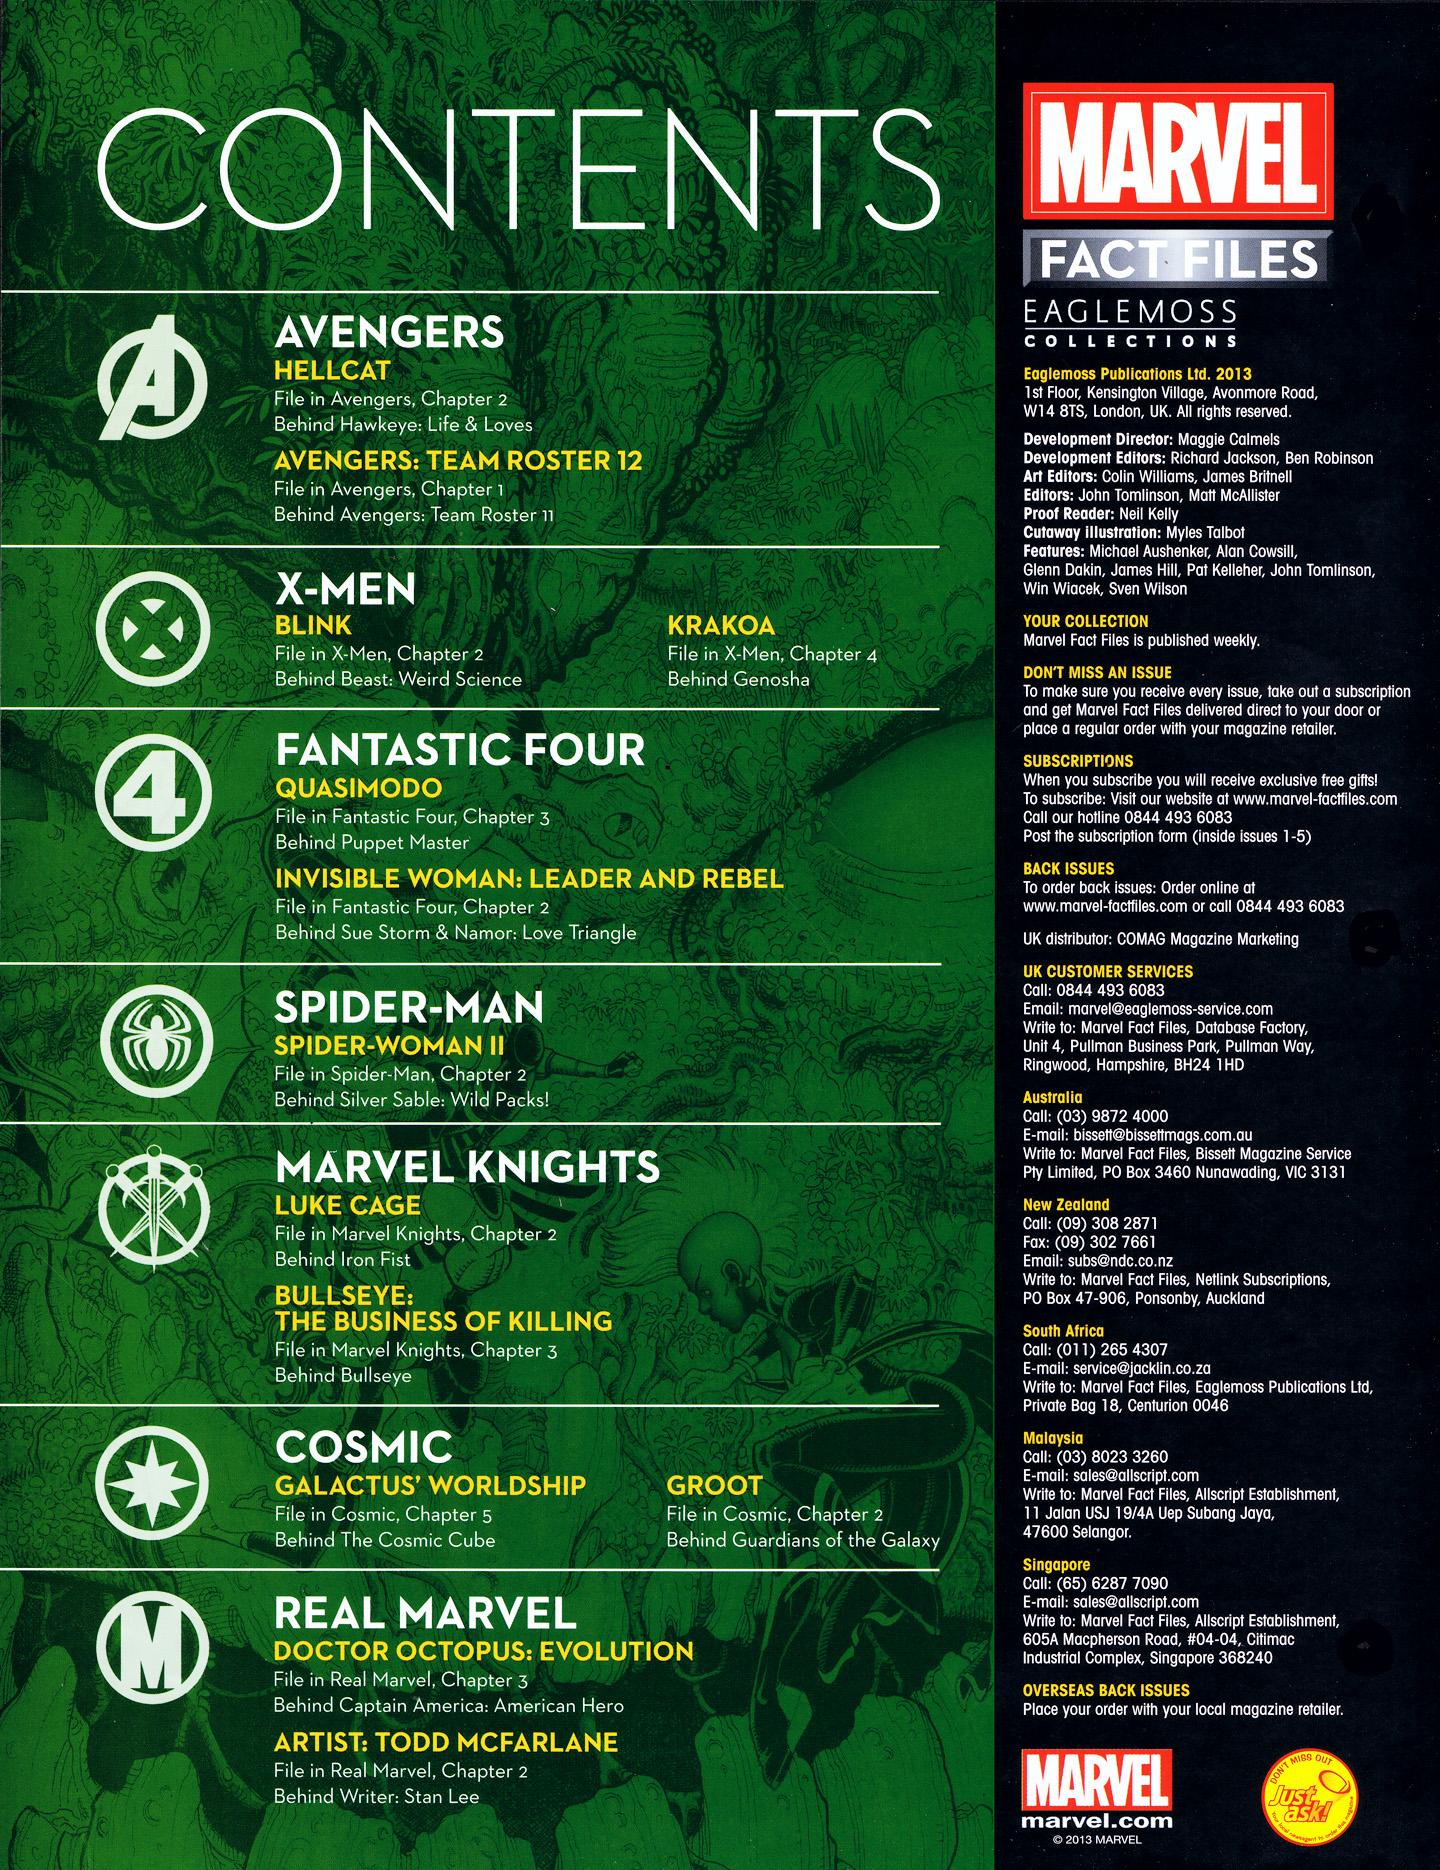 Read online Marvel Fact Files comic -  Issue #39 - 3